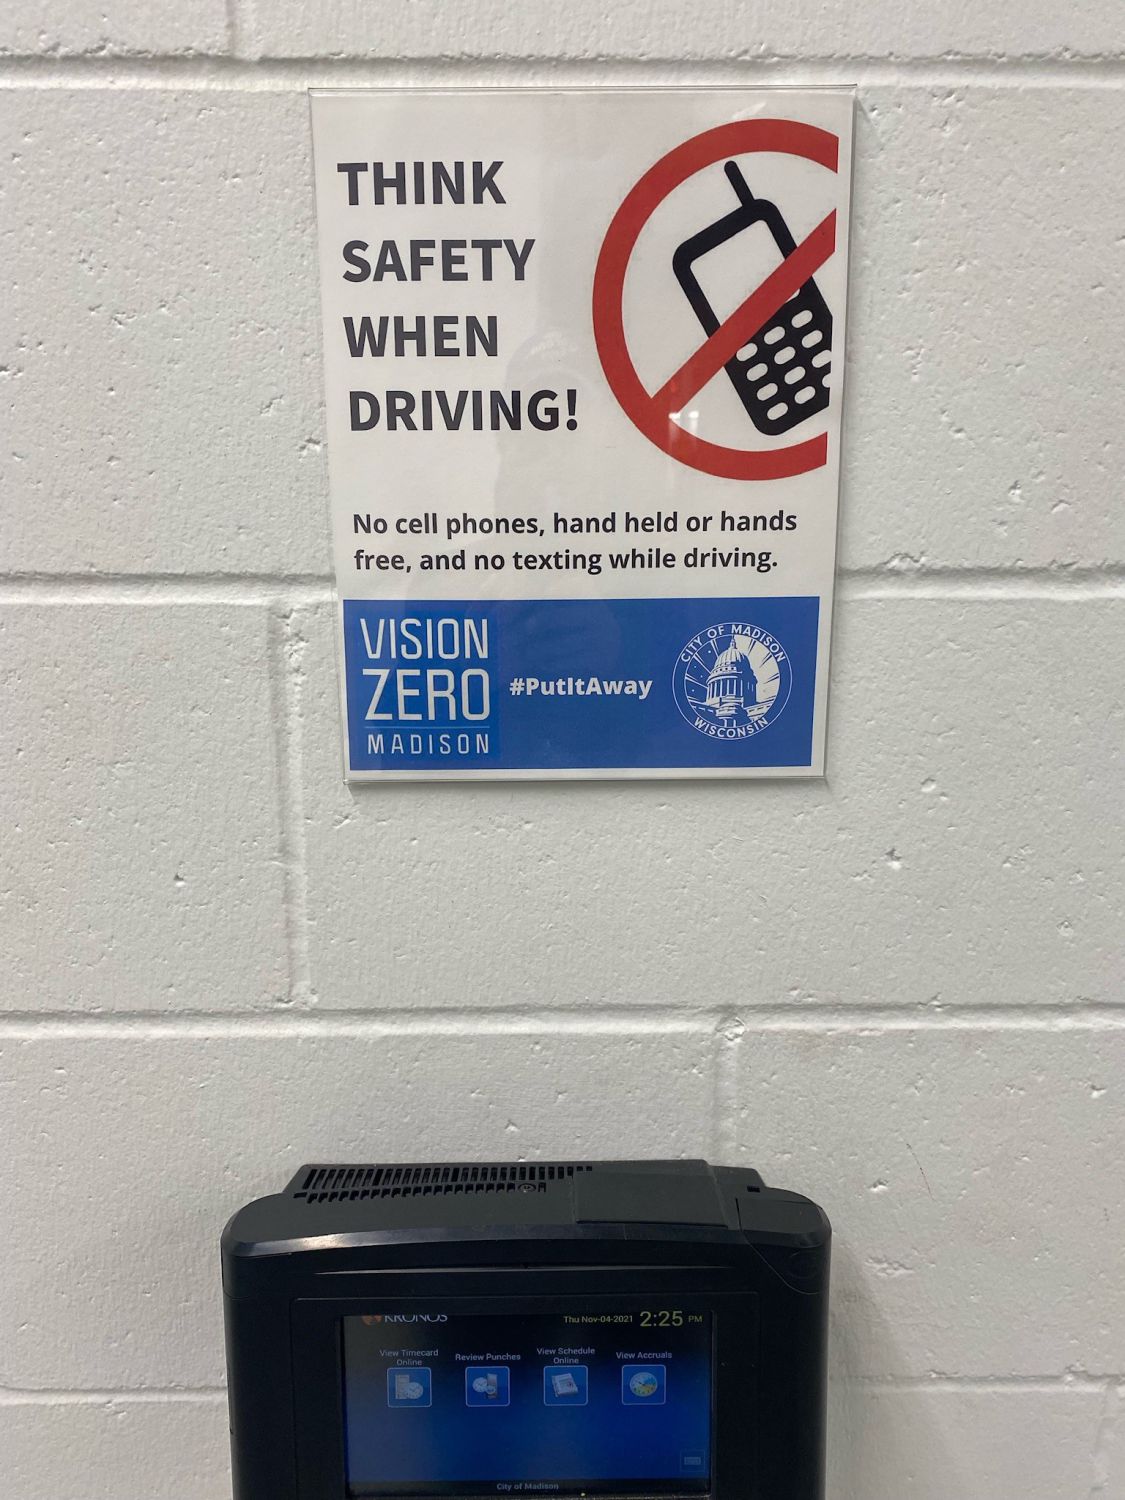 Think Safety When Driving Signage